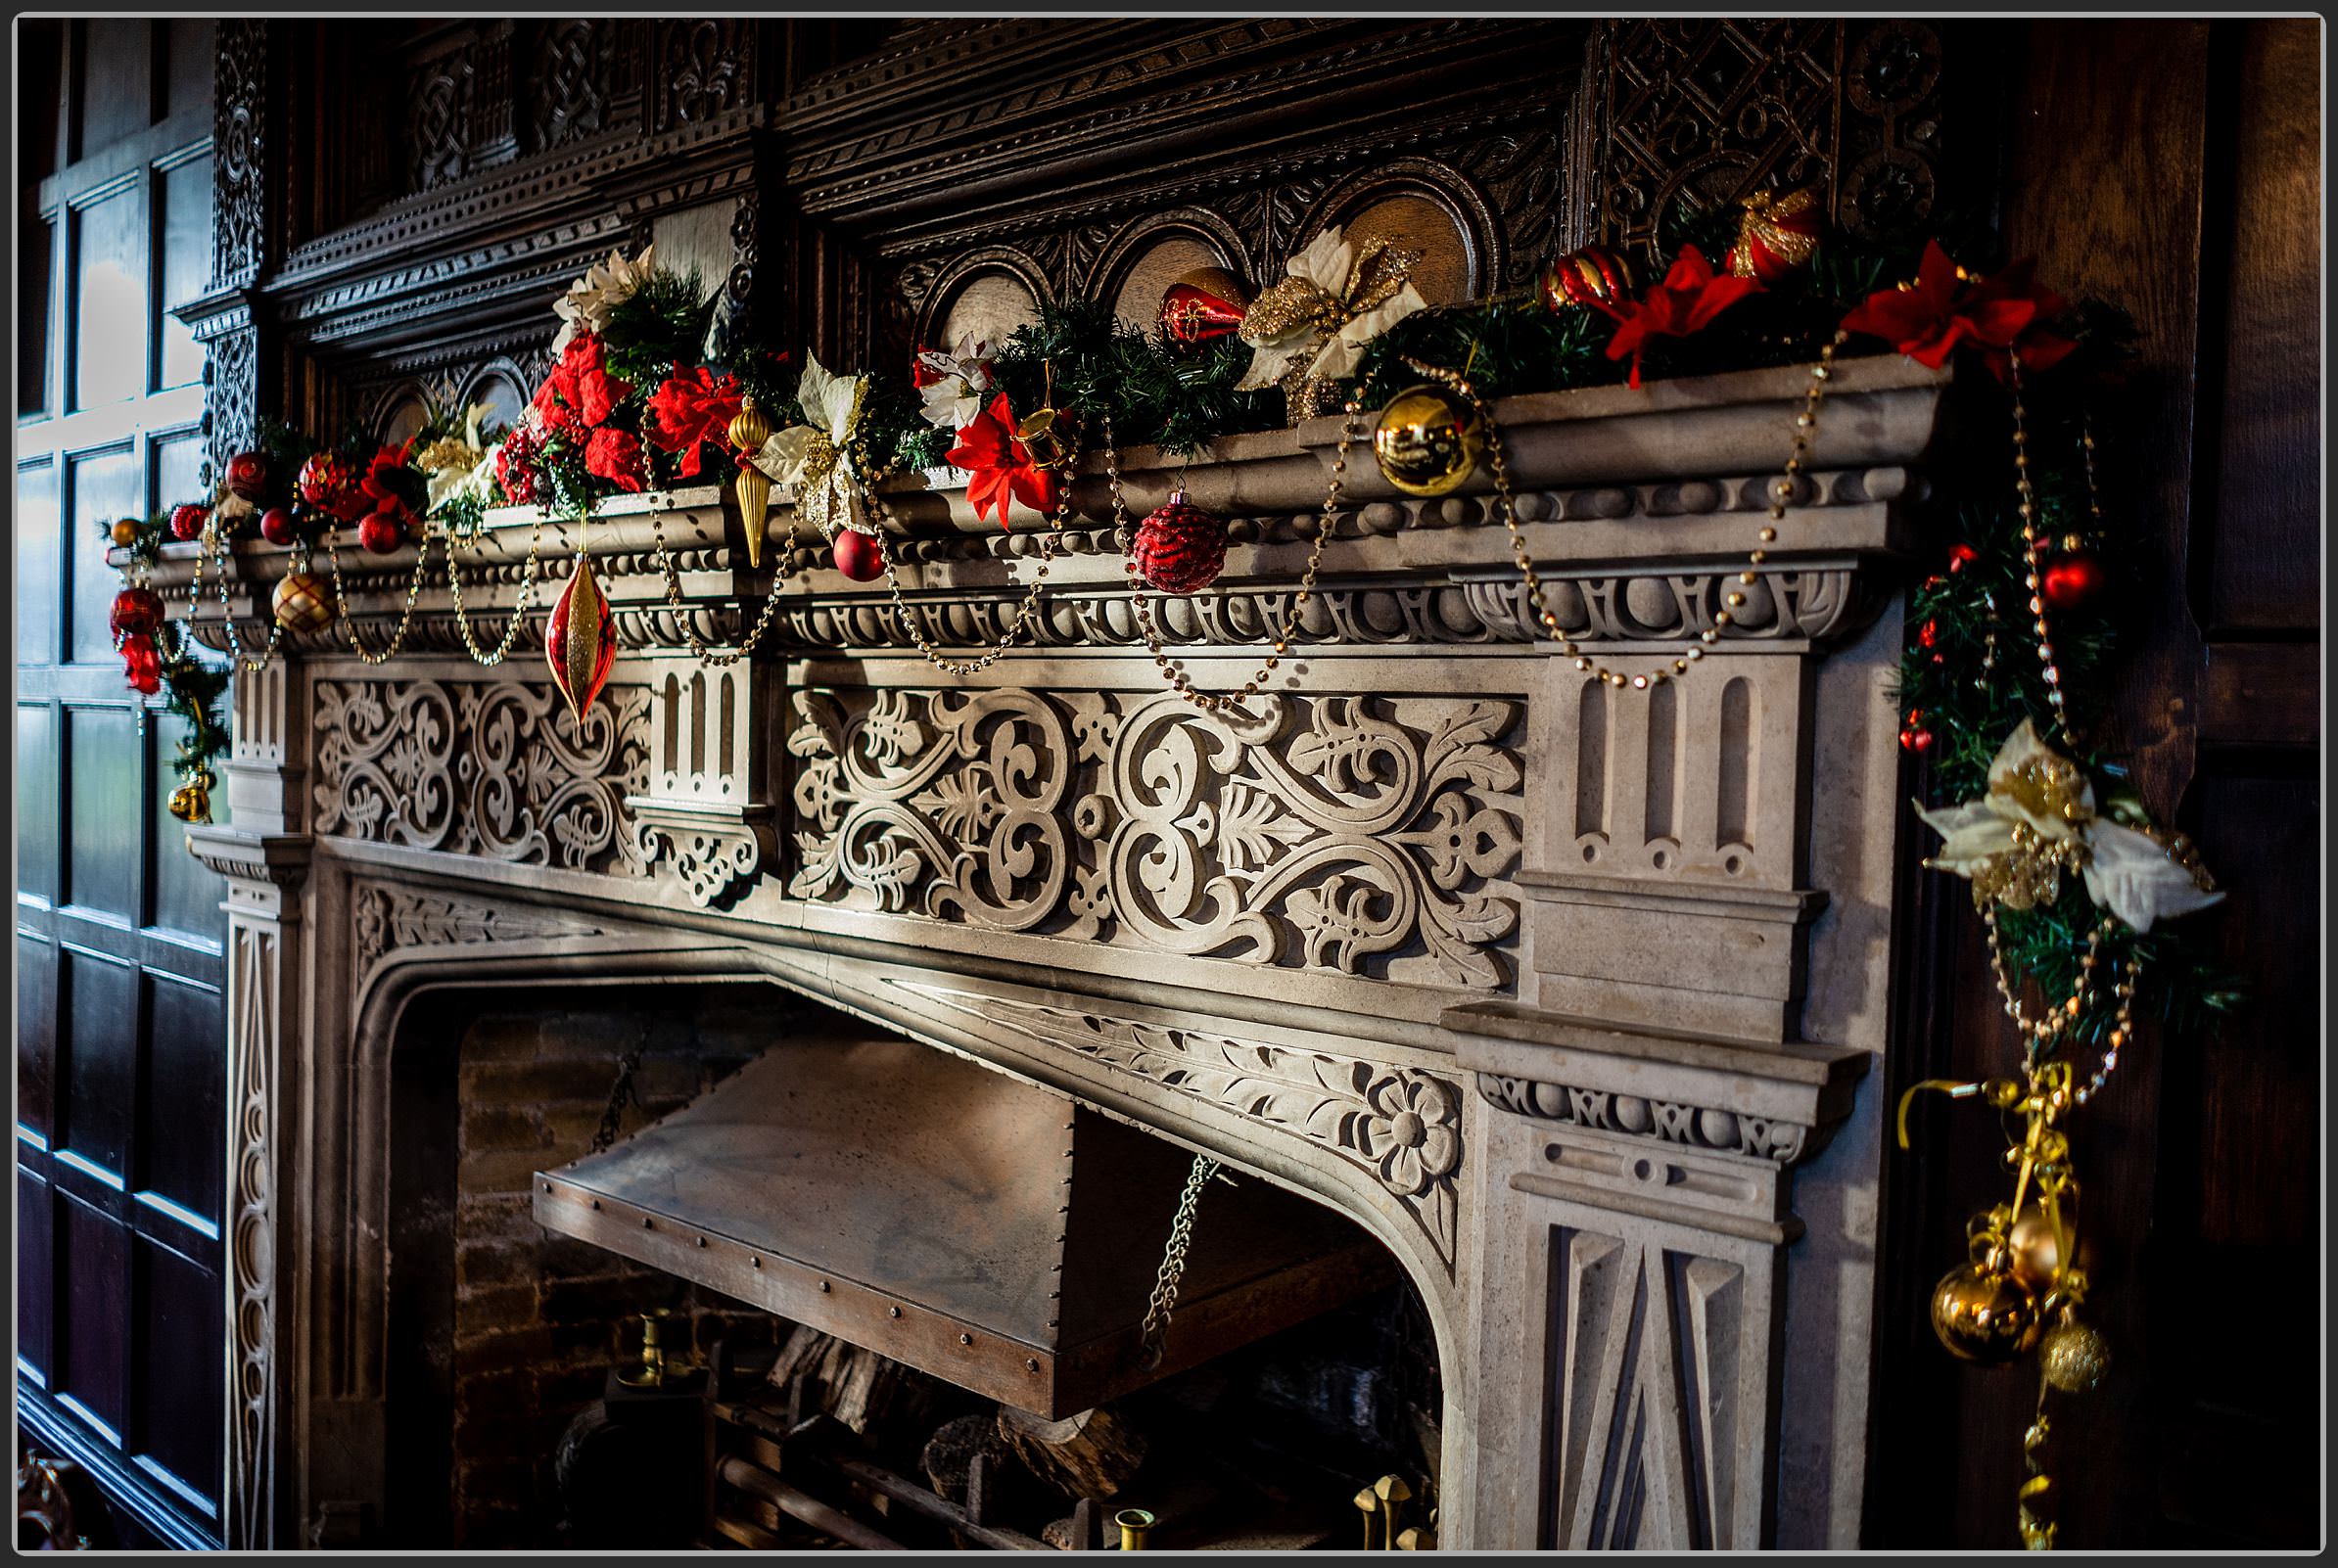 Fireplace decorated at Christmas